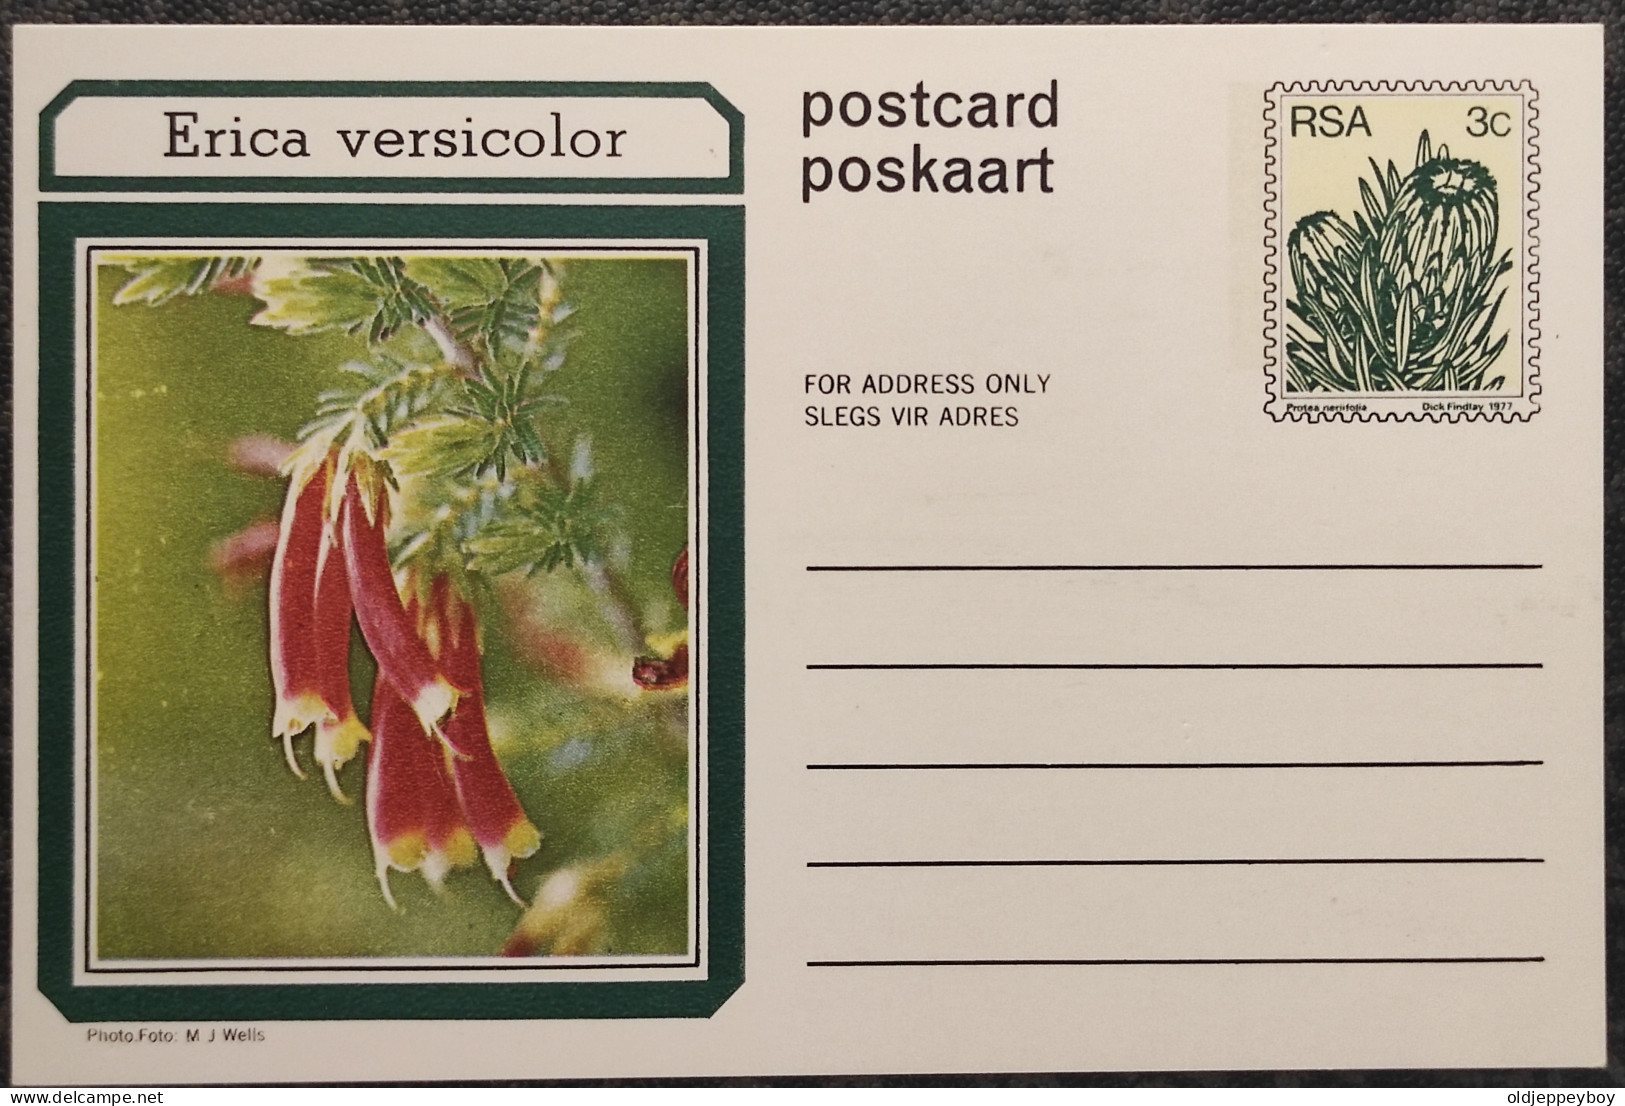 3c SOUTH AFRICA Postal STATIONERY CARD Illus ERICA VERSICOLOR FLOWER Cover Stamps Flowers Rsa - Covers & Documents